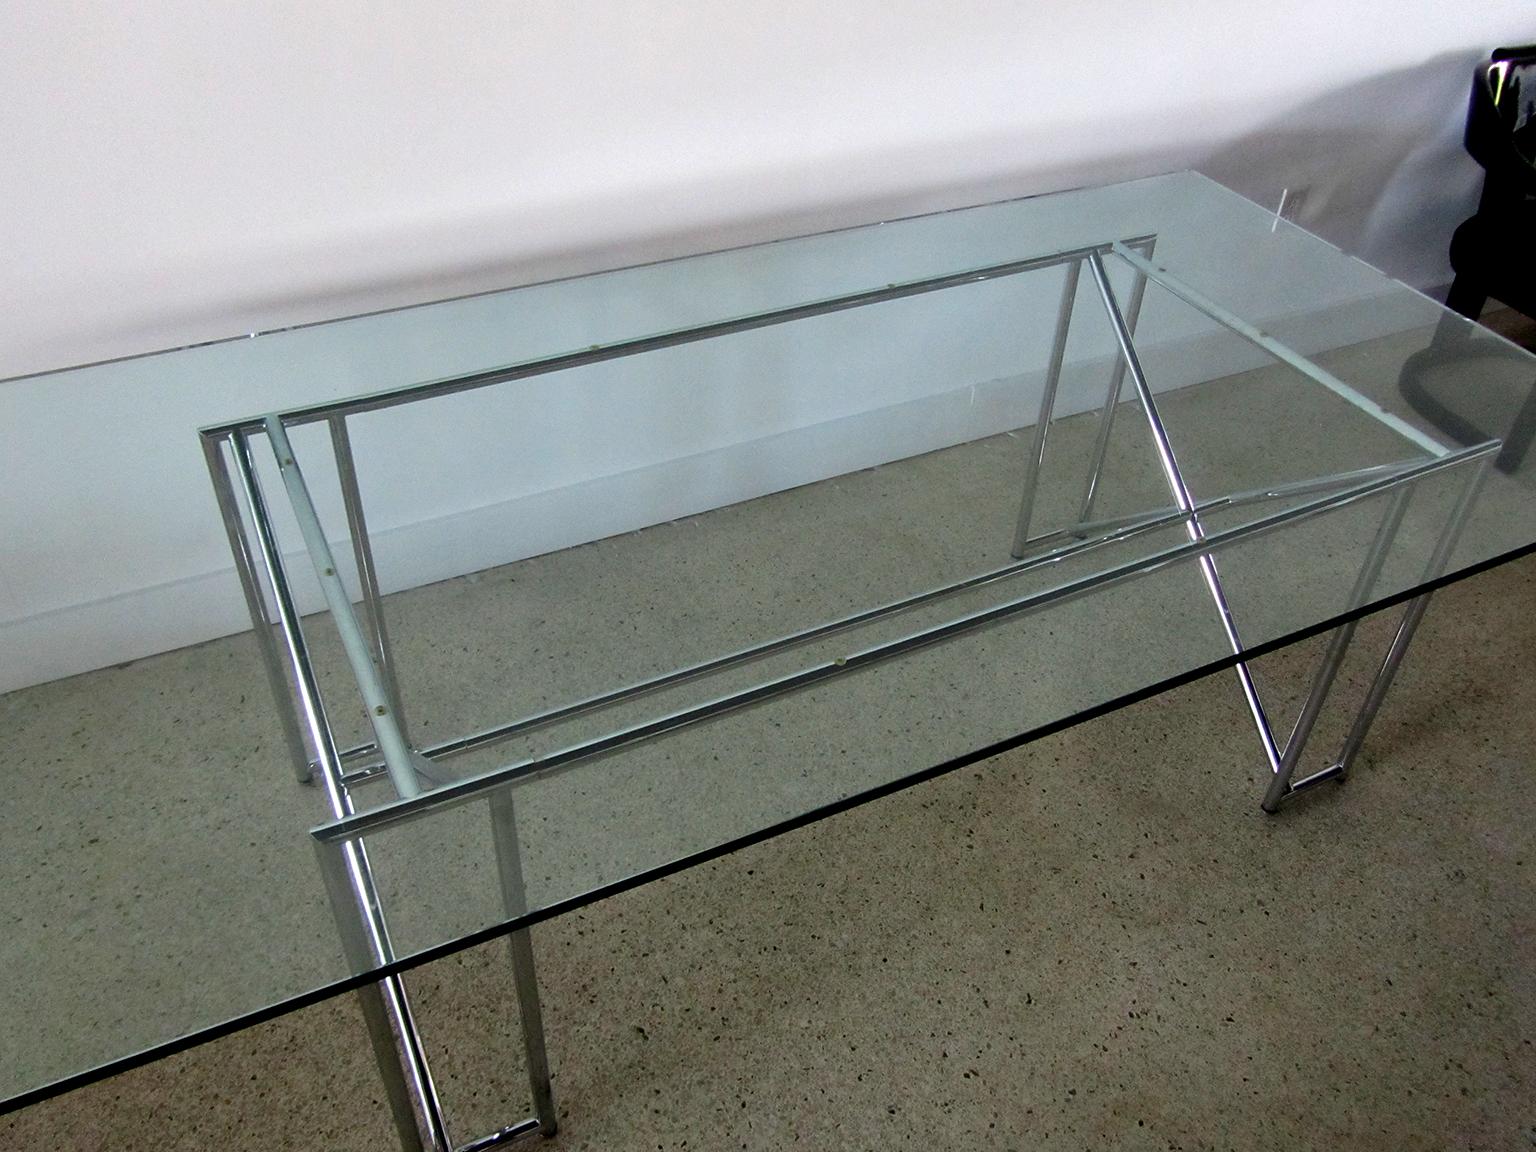 Original German Modern Chrome Double X Table, Eileen Gray In Good Condition For Sale In Hollywood, FL